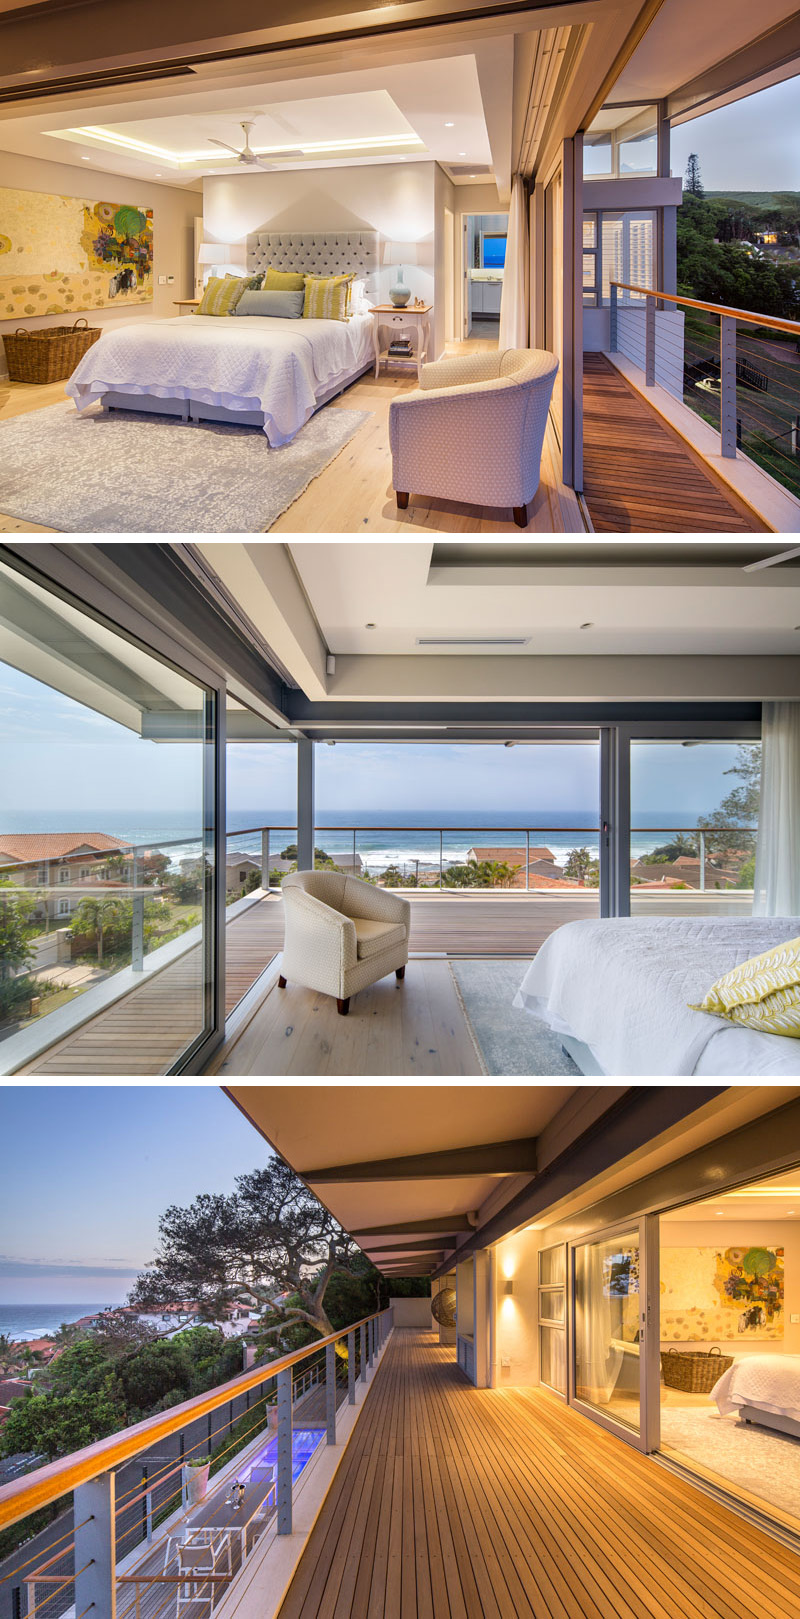 This modern bedroom has an unobstructed view of the ocean, as it can be opened onto a large wrap-around balcony that overlooks the pool below.